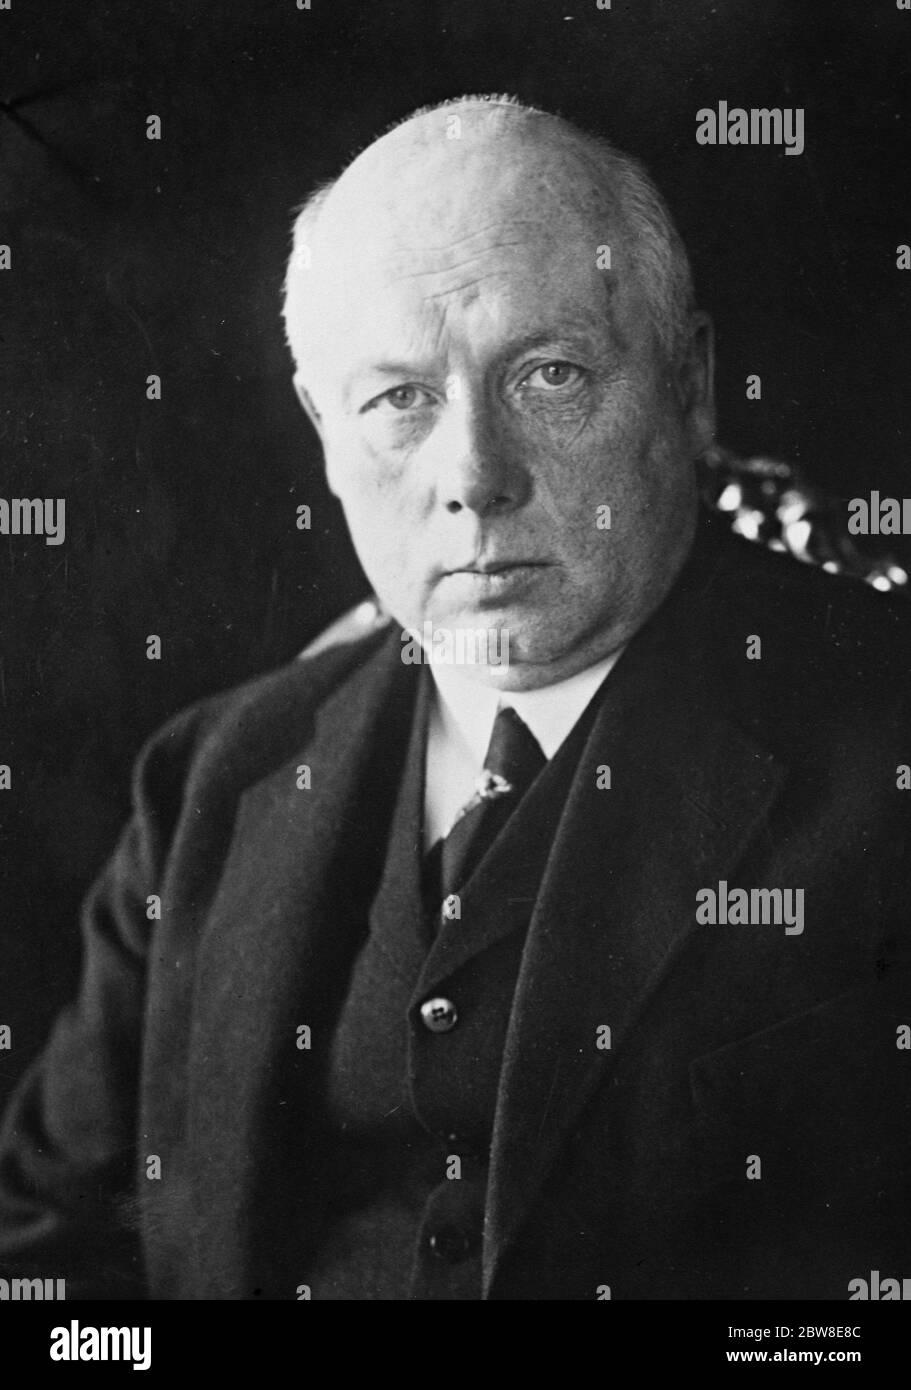 German Finance Minister . Professor Moldenhauer , Minister of Economics , has been appointed Minister of Finance in succession to Dr Hilferding . Herr Robert Schmidt , Socialist members of Reichstag , takes over the Ministry of Economics . 8 January 1930 Stock Photo